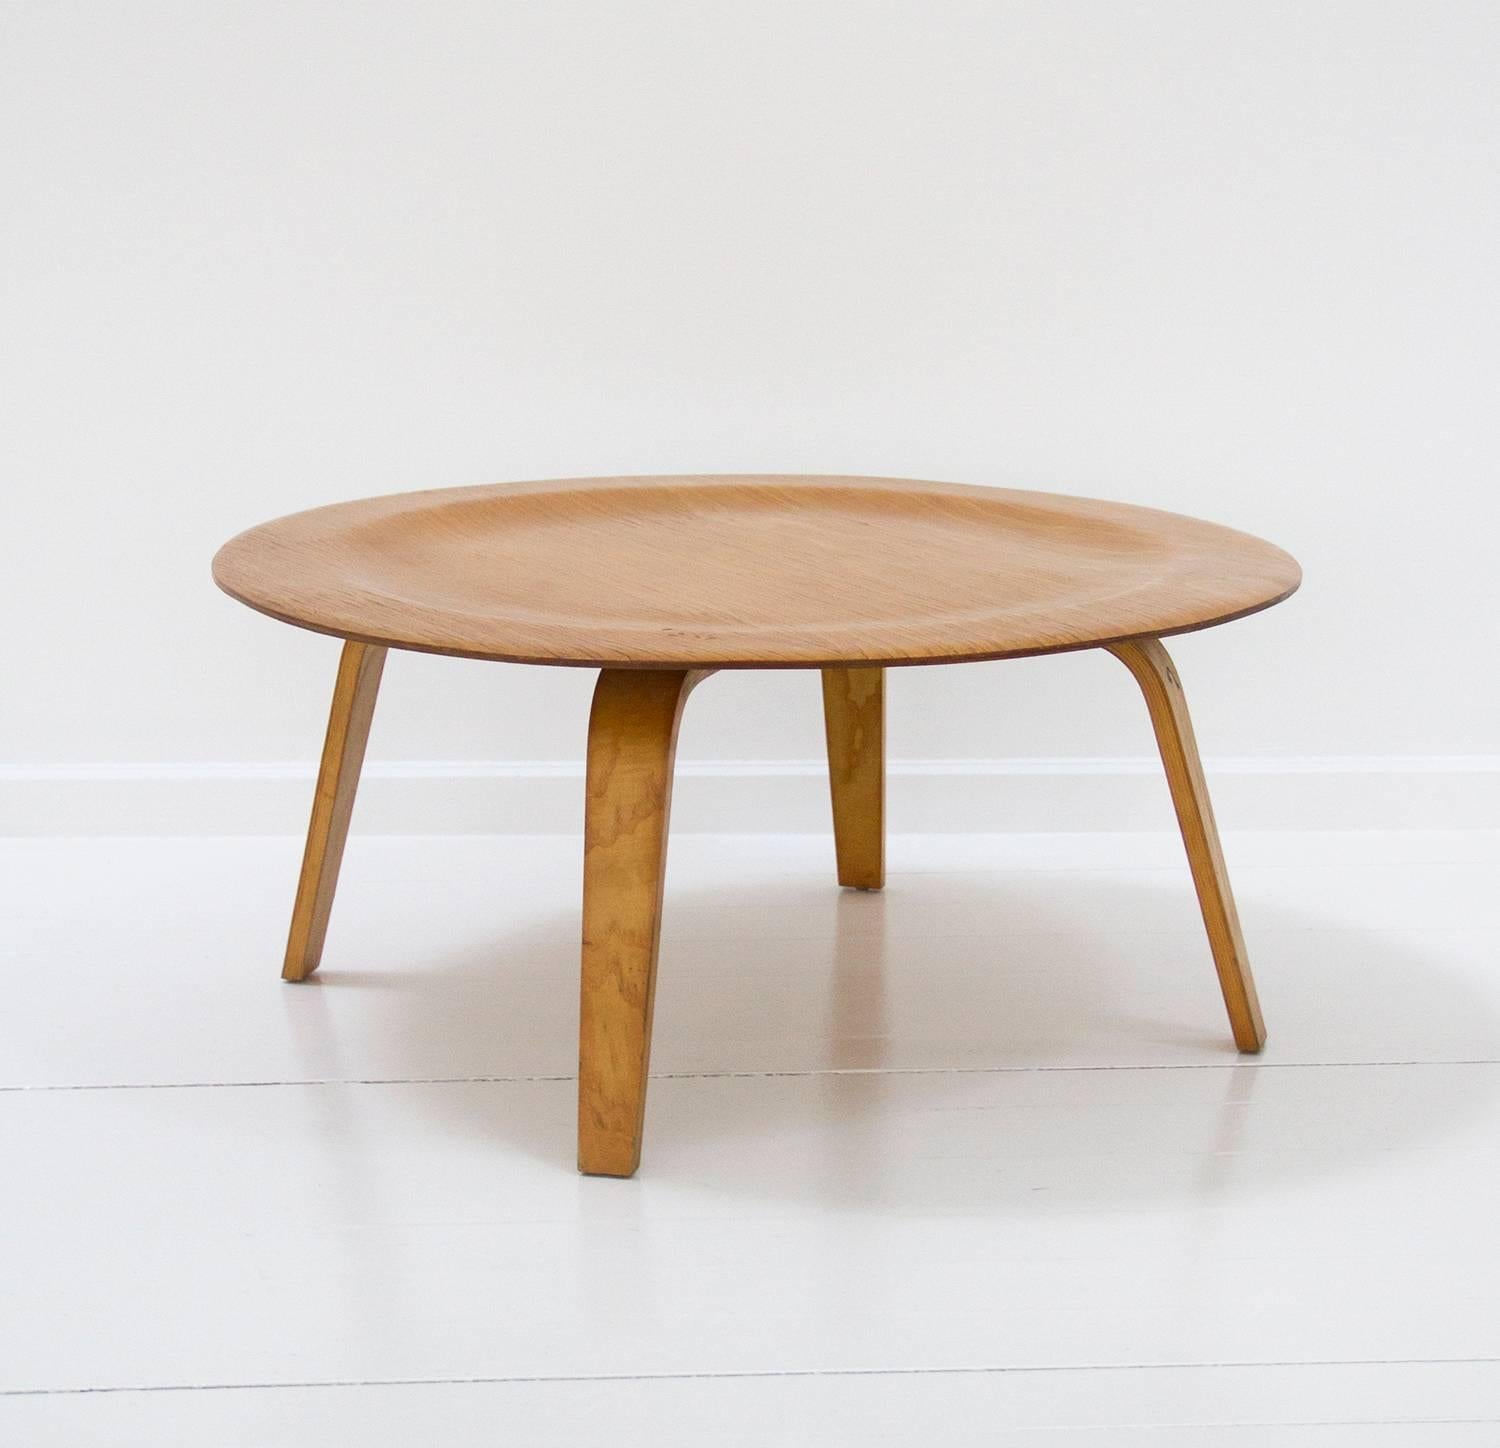 Coffee table designed by Charles and Ray Eames, model CTW.
Made of molded plywood with wood legs features,
circa 1940, United States.

 